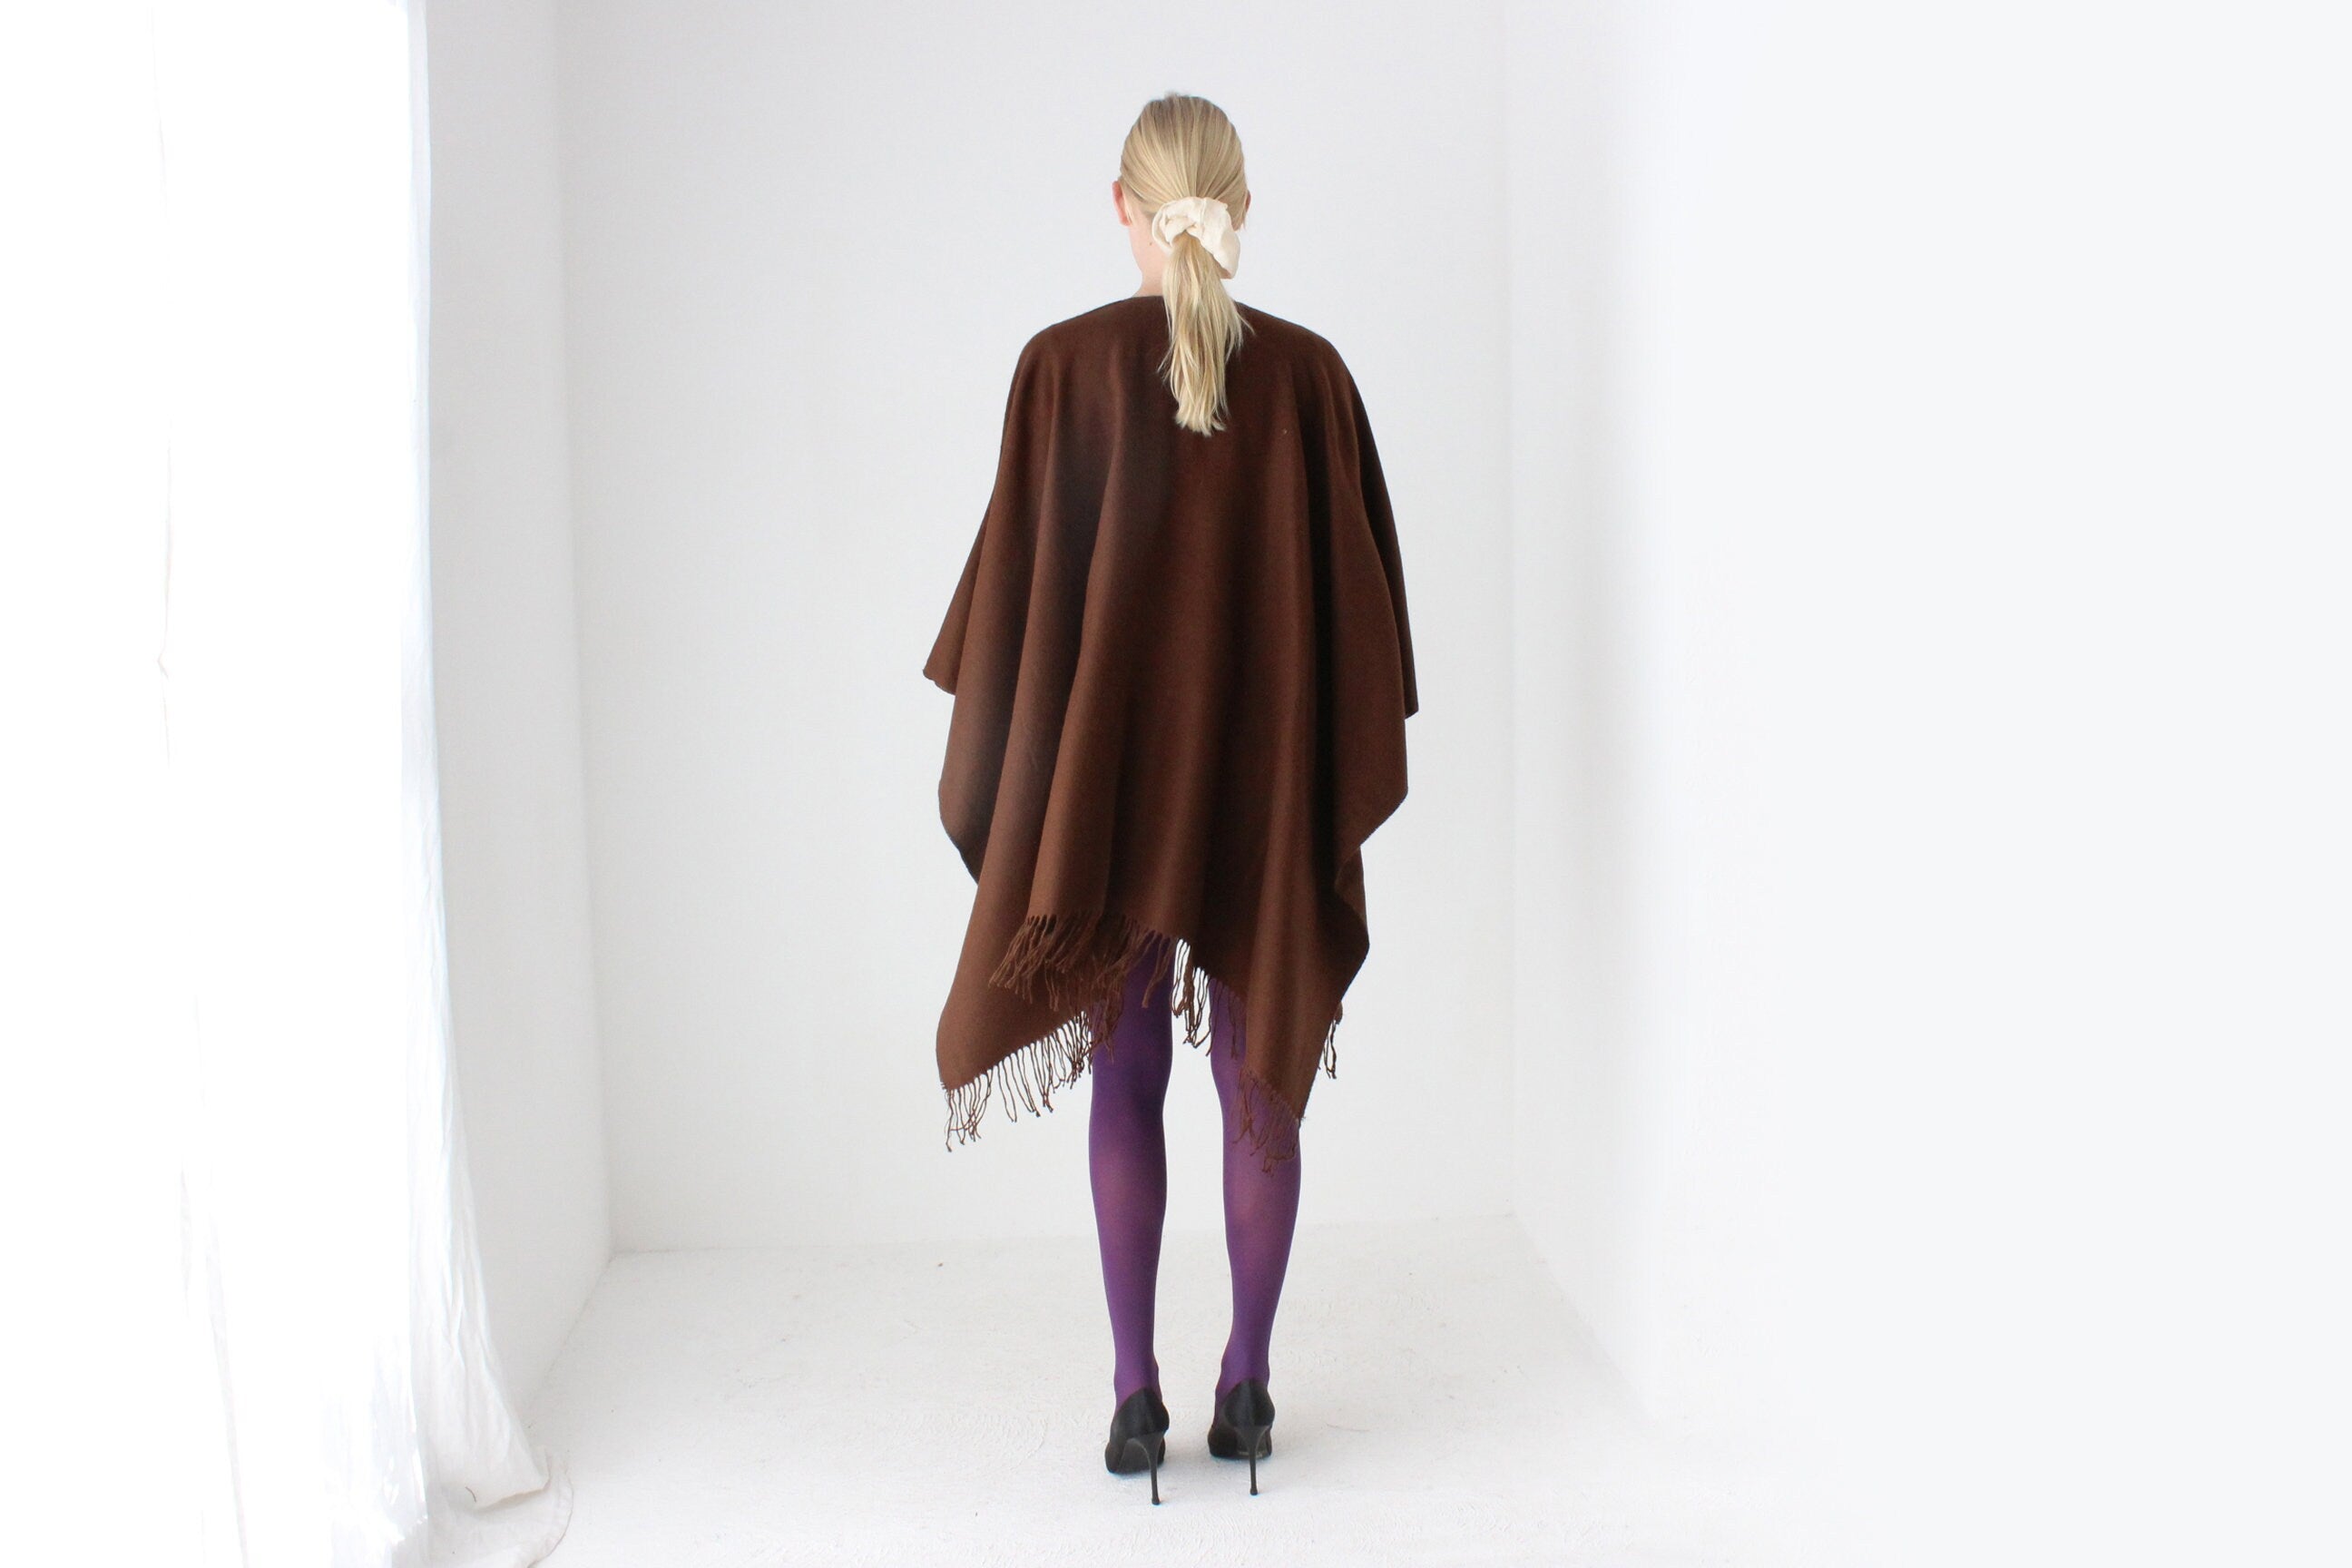 2000s Deadstock Chocolate Wool Blend Free Size Shawl Wrap